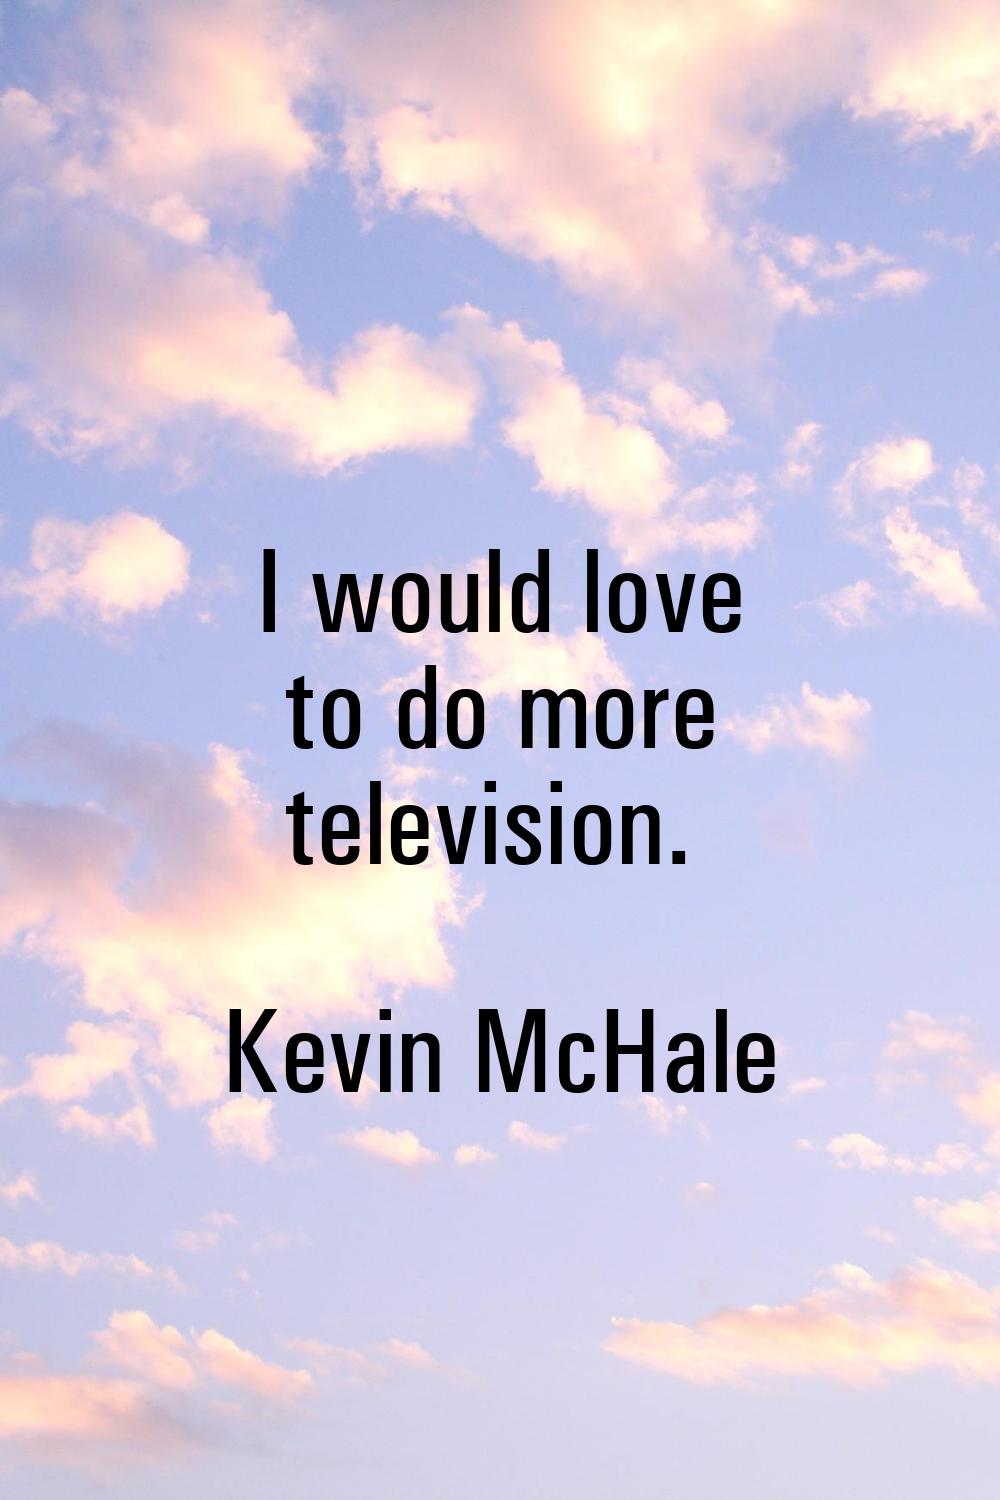 I would love to do more television.